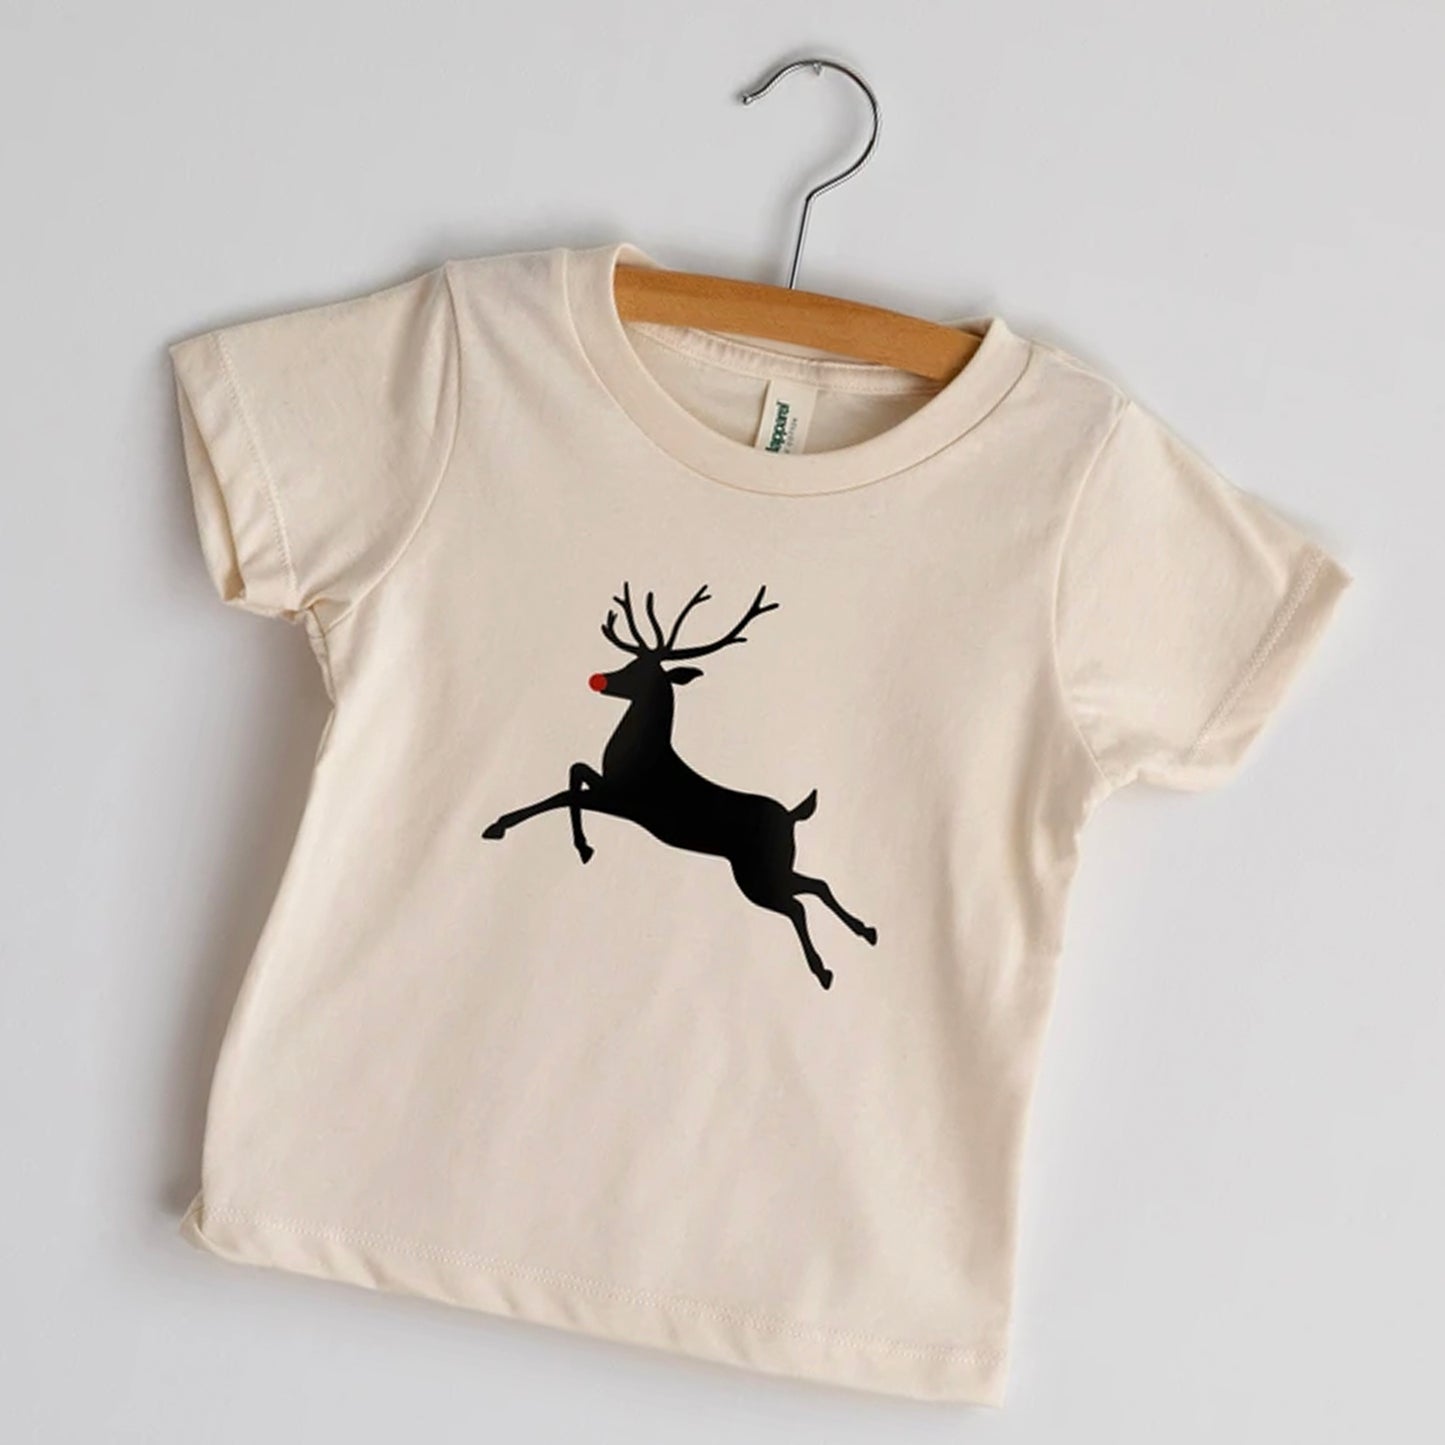 Short Sleeve Graphic Tee, Rudolph The Red Nosed Reindeer